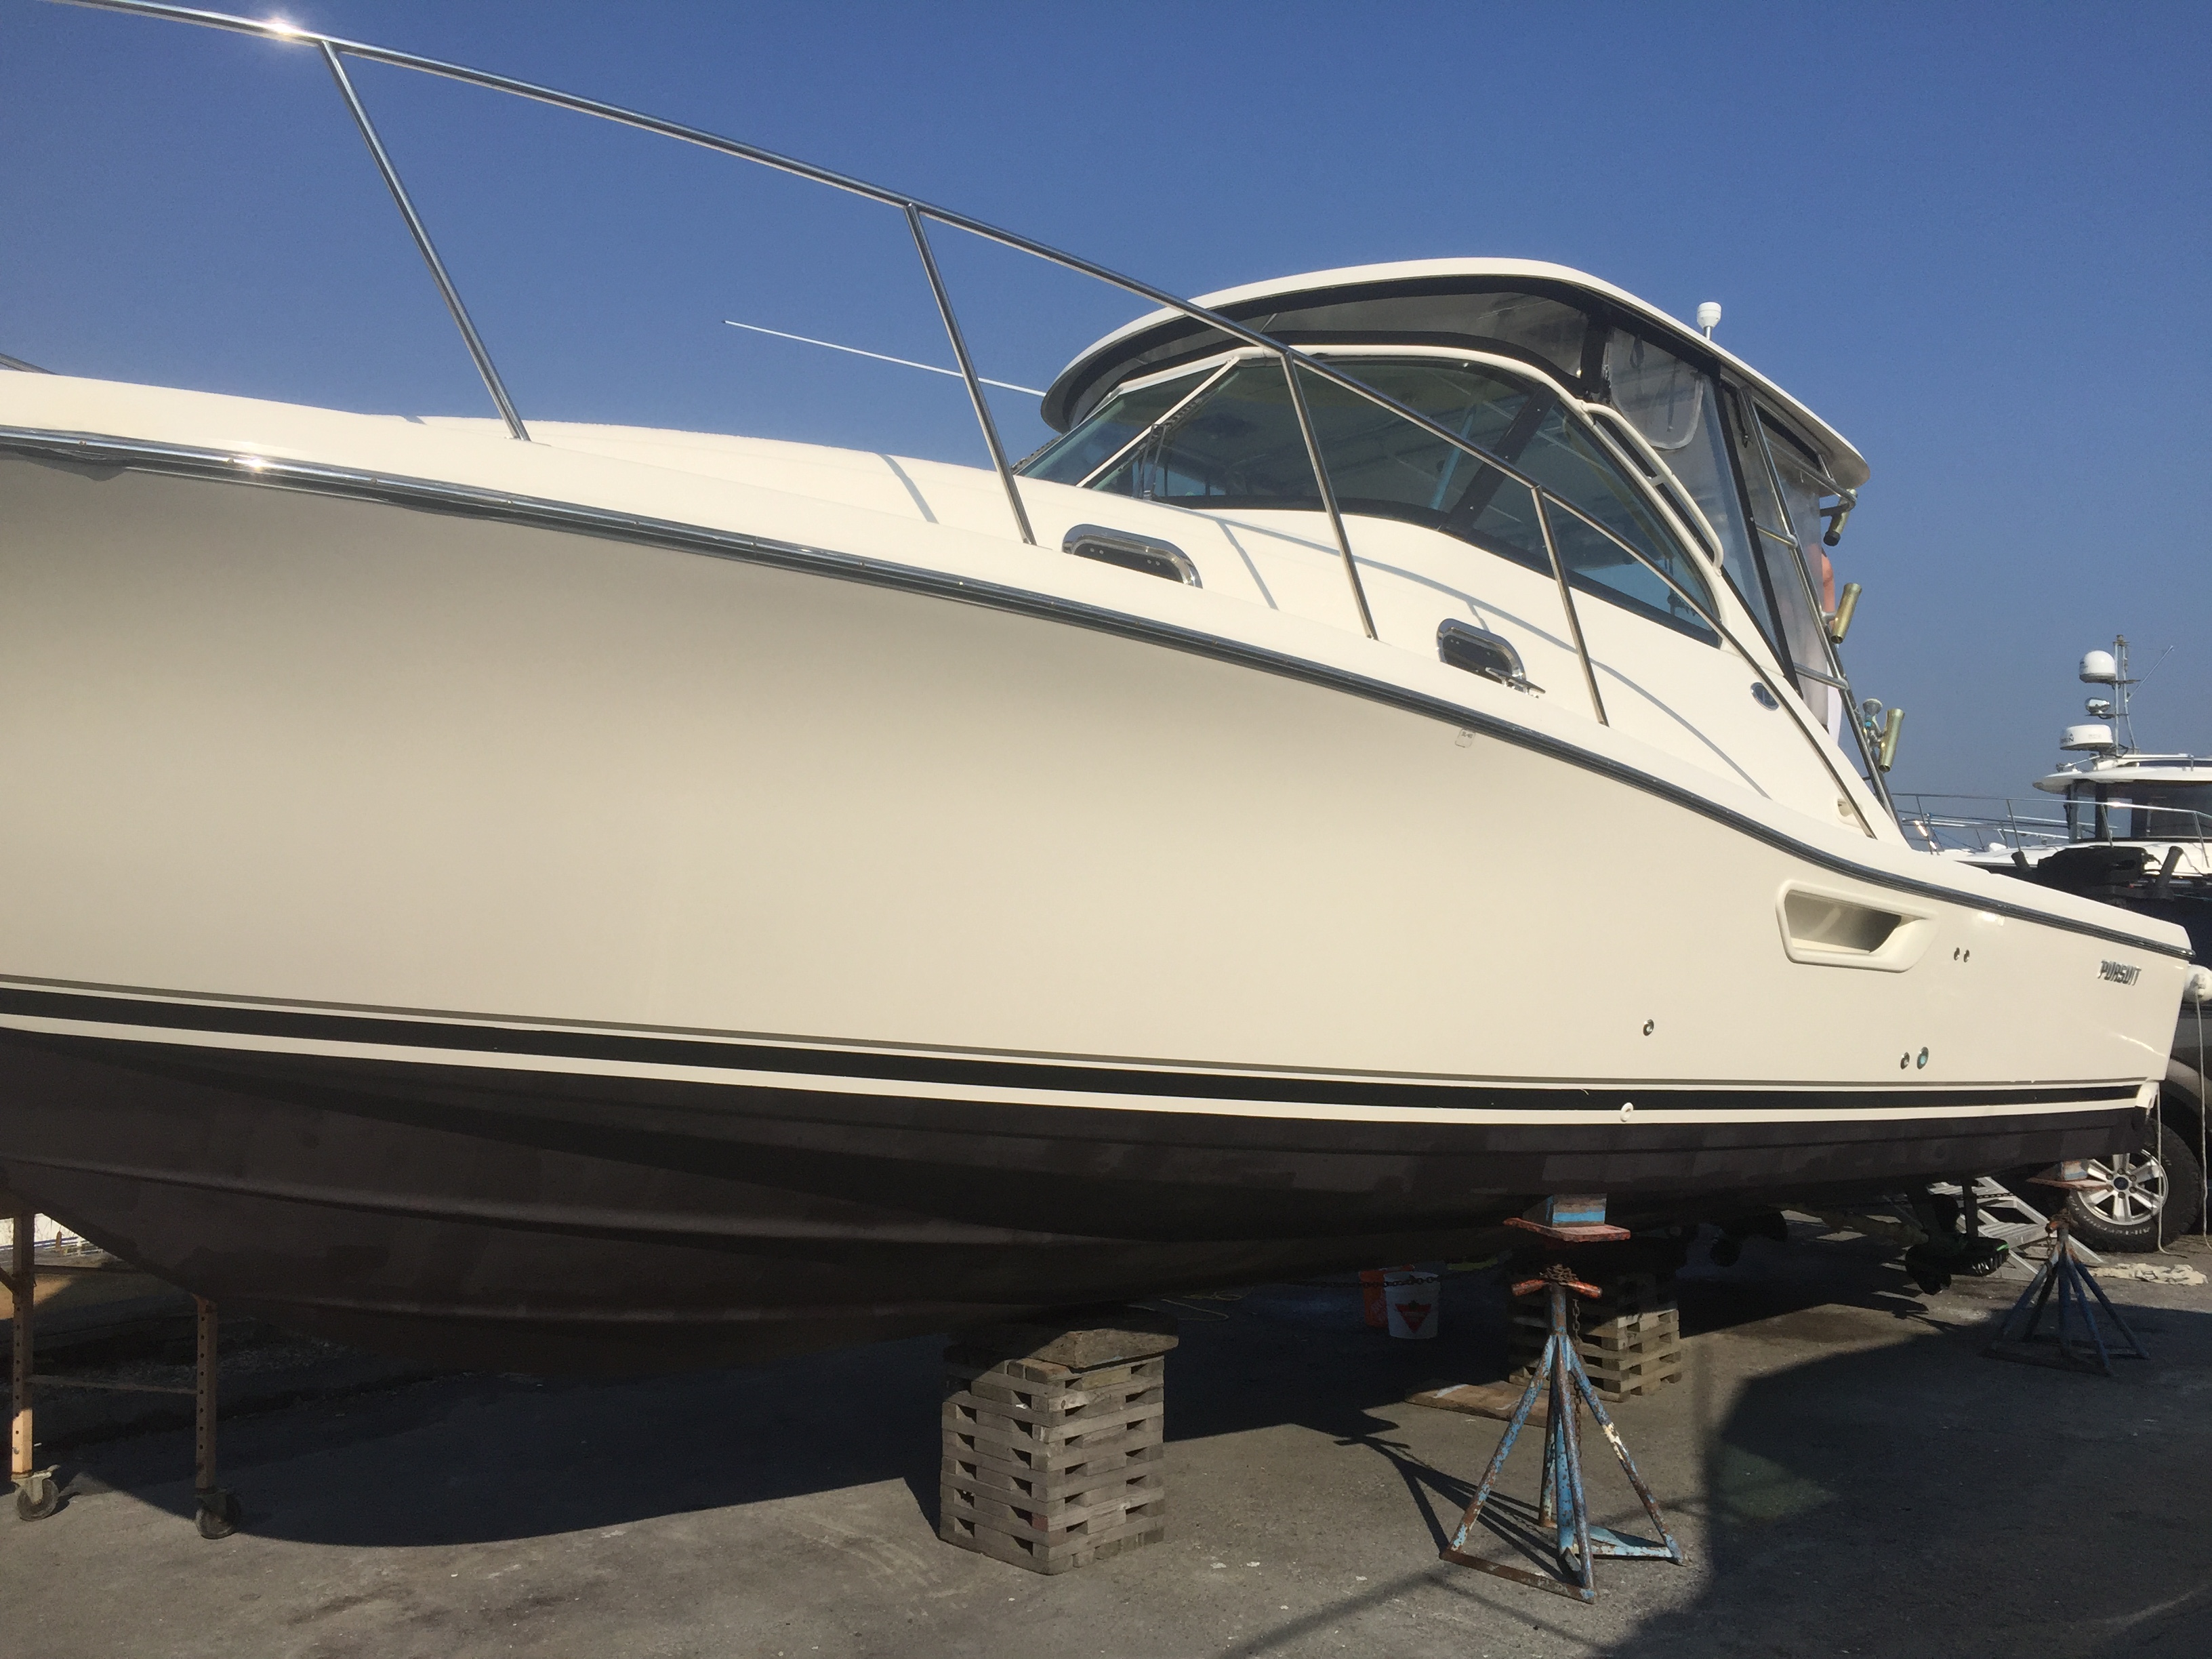 Pursuit boat maintenance and repairs from MRV Marine Services.